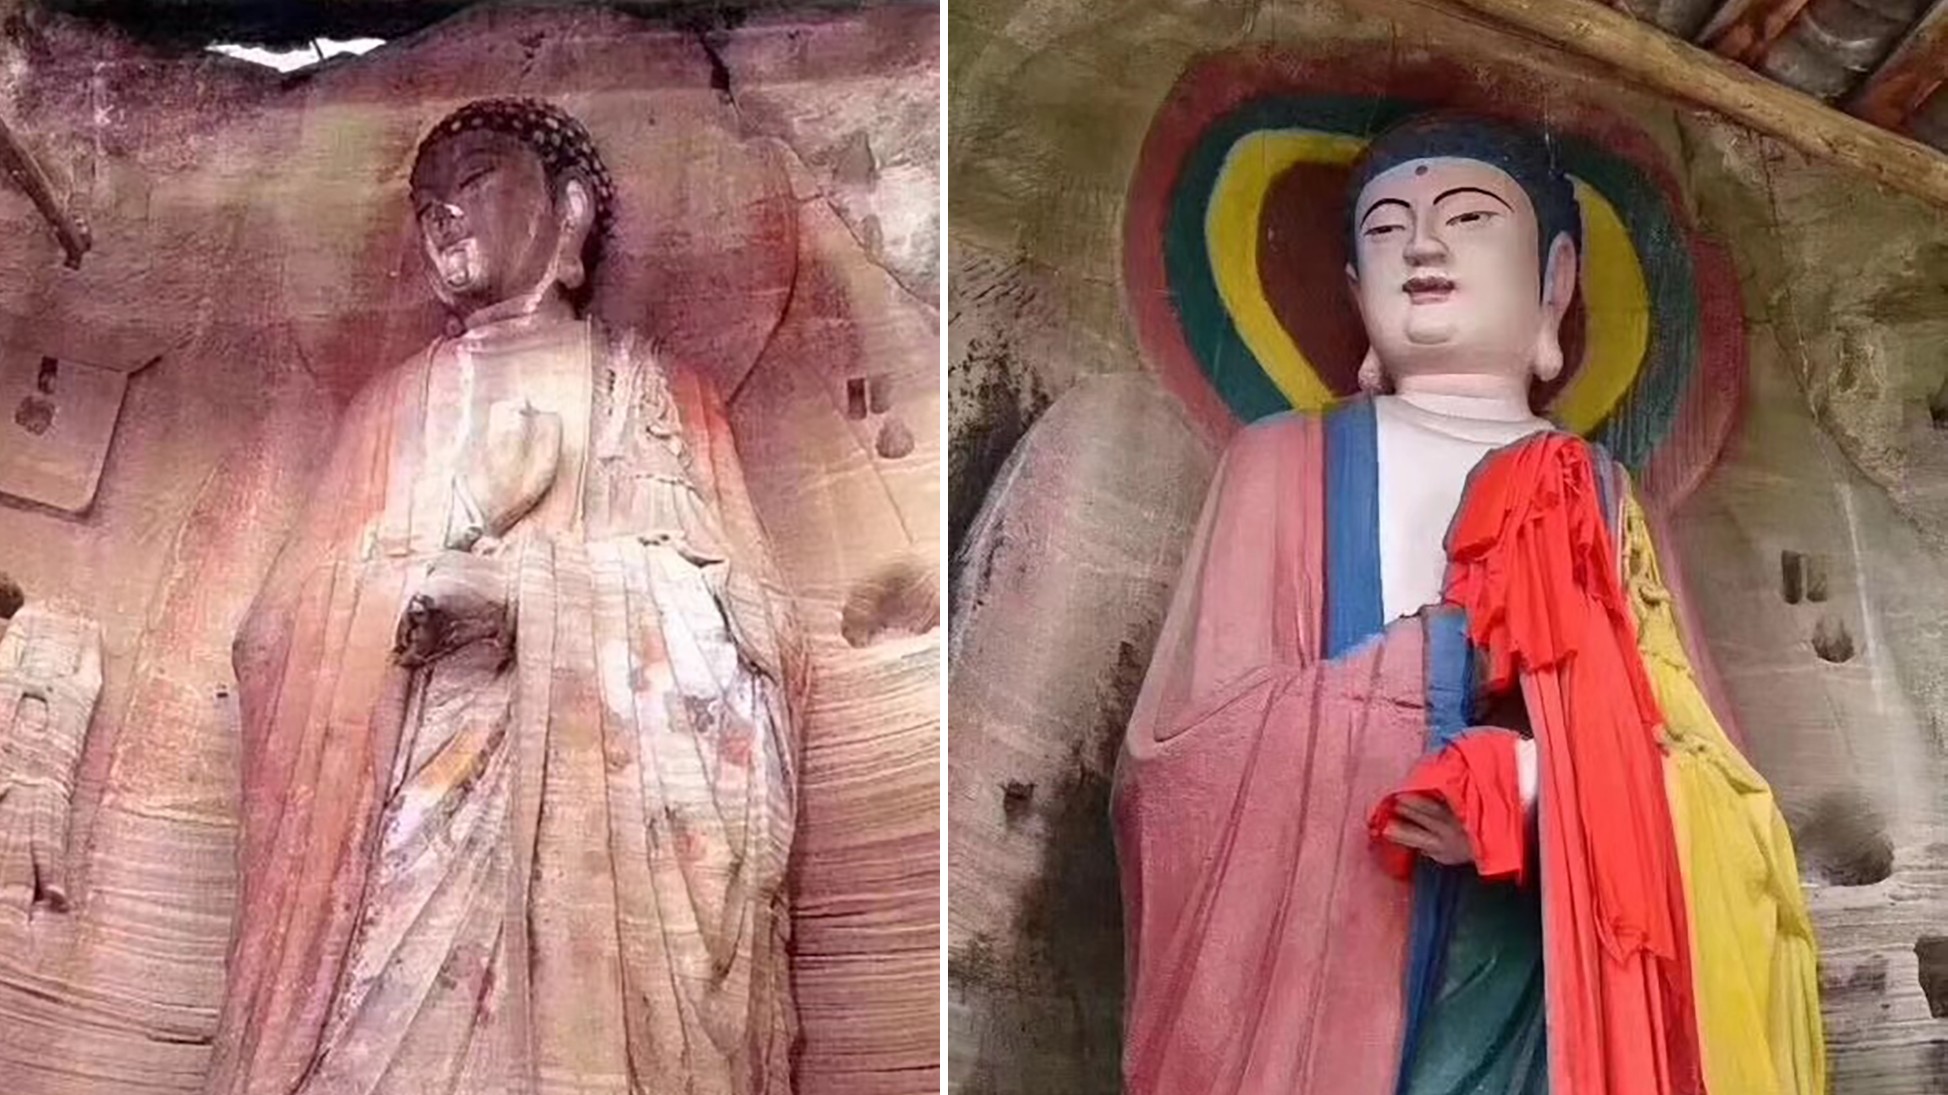 A botched restoration job that painted over Buddhist sculptures in Anyue township, Sichuan province, has drawn harsh criticism. Photo: ThePaper.cn